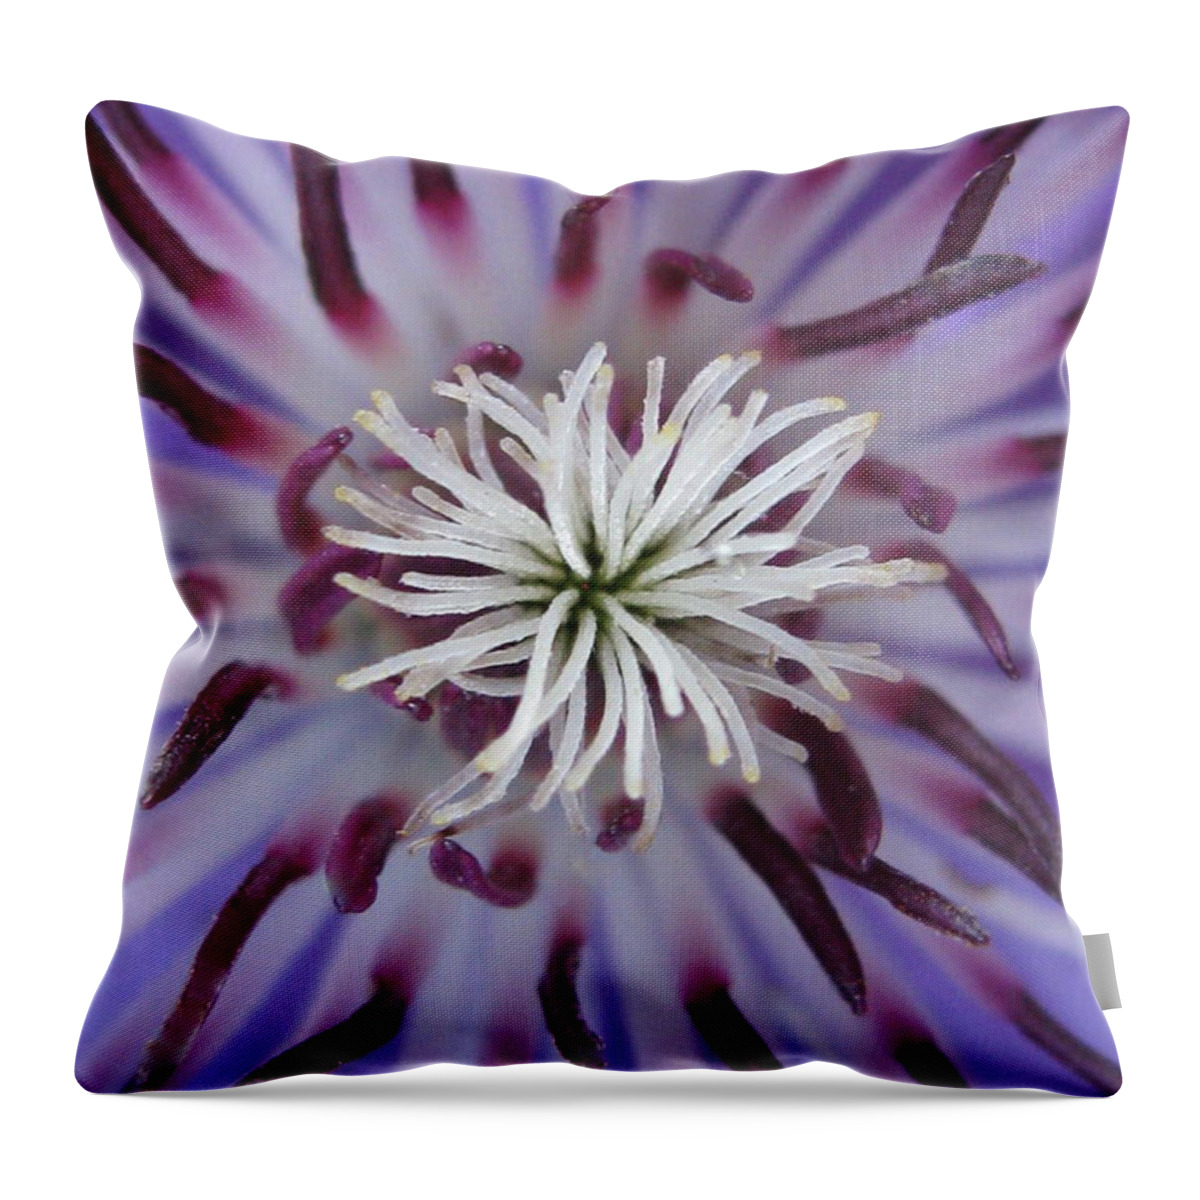 Flower Throw Pillow featuring the photograph Underrated #1 by Holy Hands